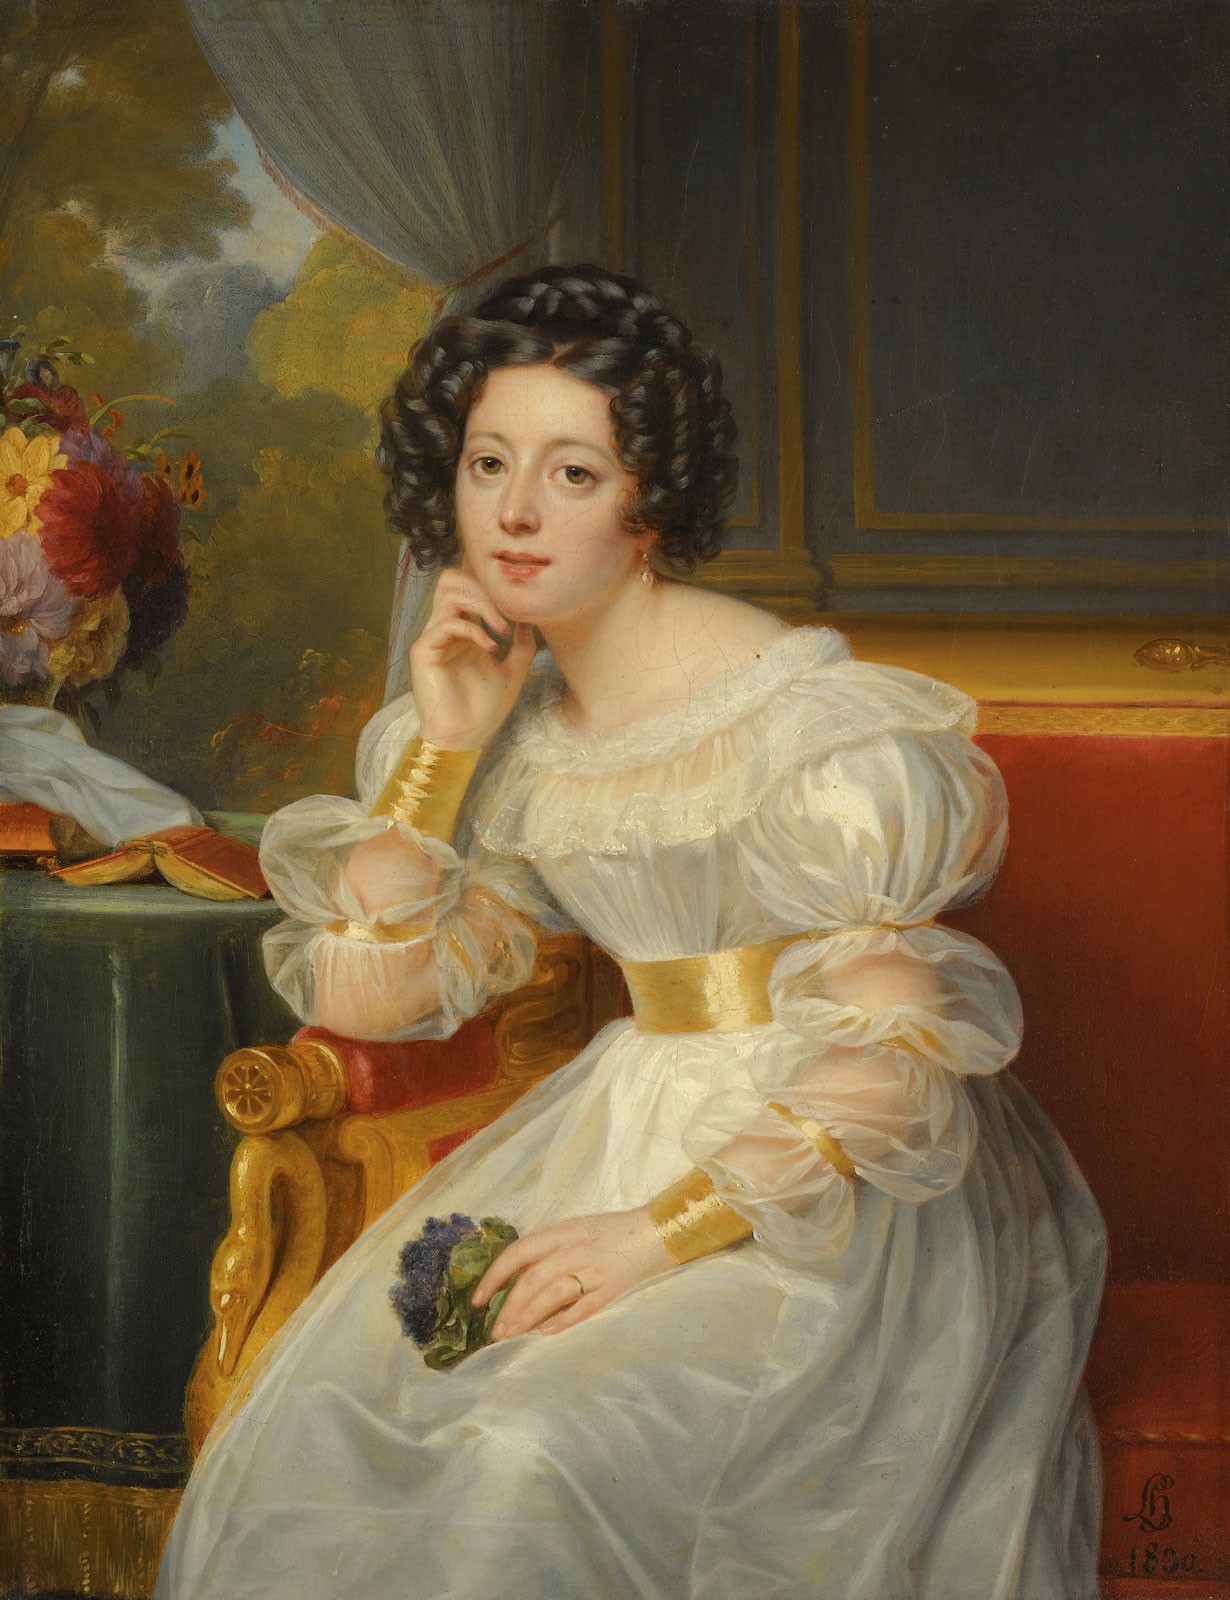 Portrait of a Young Lady, c.1820, Oil on Canvas